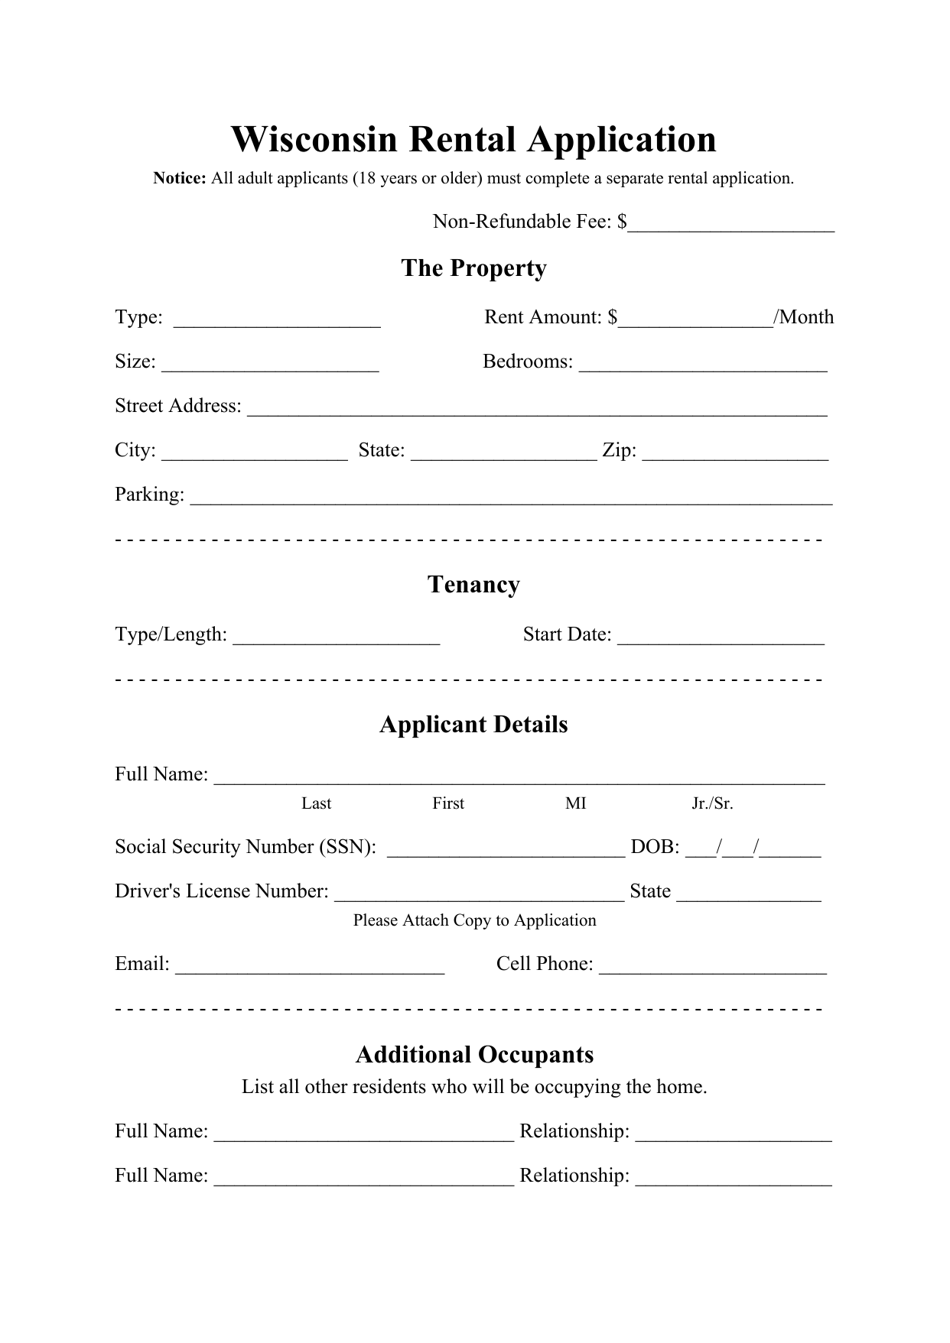 wisconsin-rental-application-form-fill-out-sign-online-and-download